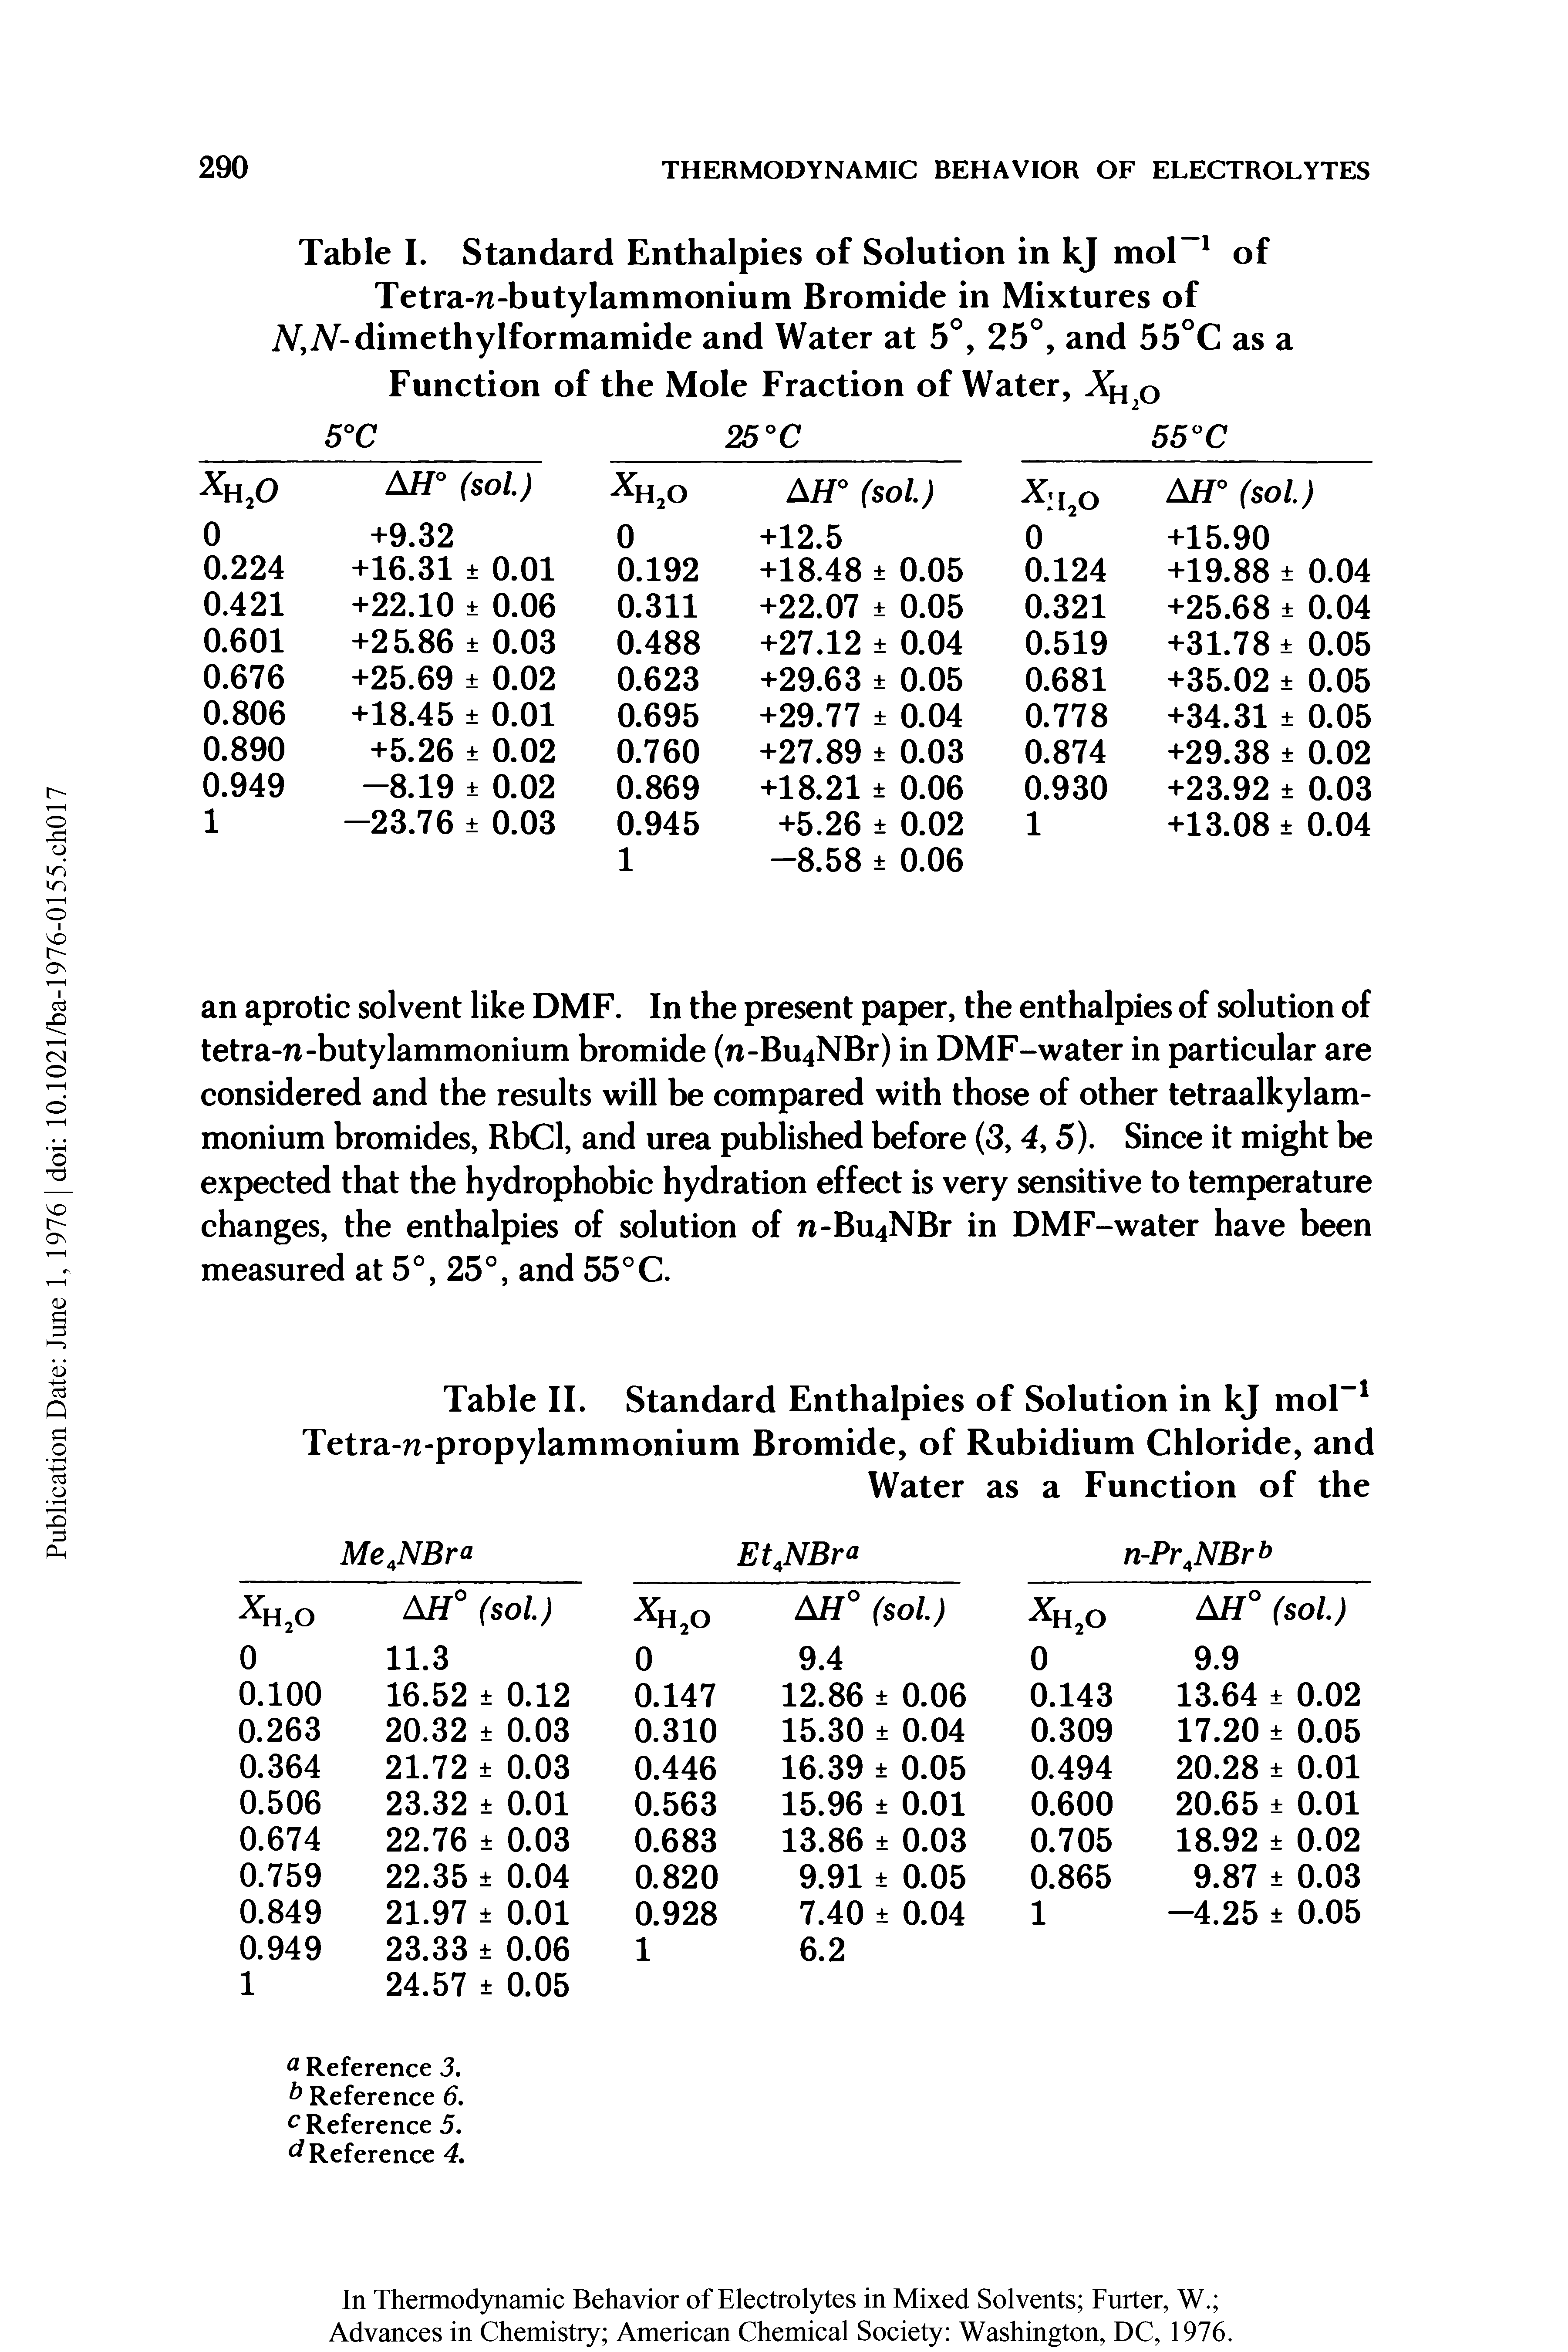 Table I. Standard Enthalpies of Solution in kj mol 1 of Tetra -n-butylammonium Bromide in Mixtures of Af,iV-dimethylformamide and Water at 5°, 25°, and 55°C as a Function of the Mole Fraction of Water, XHp...